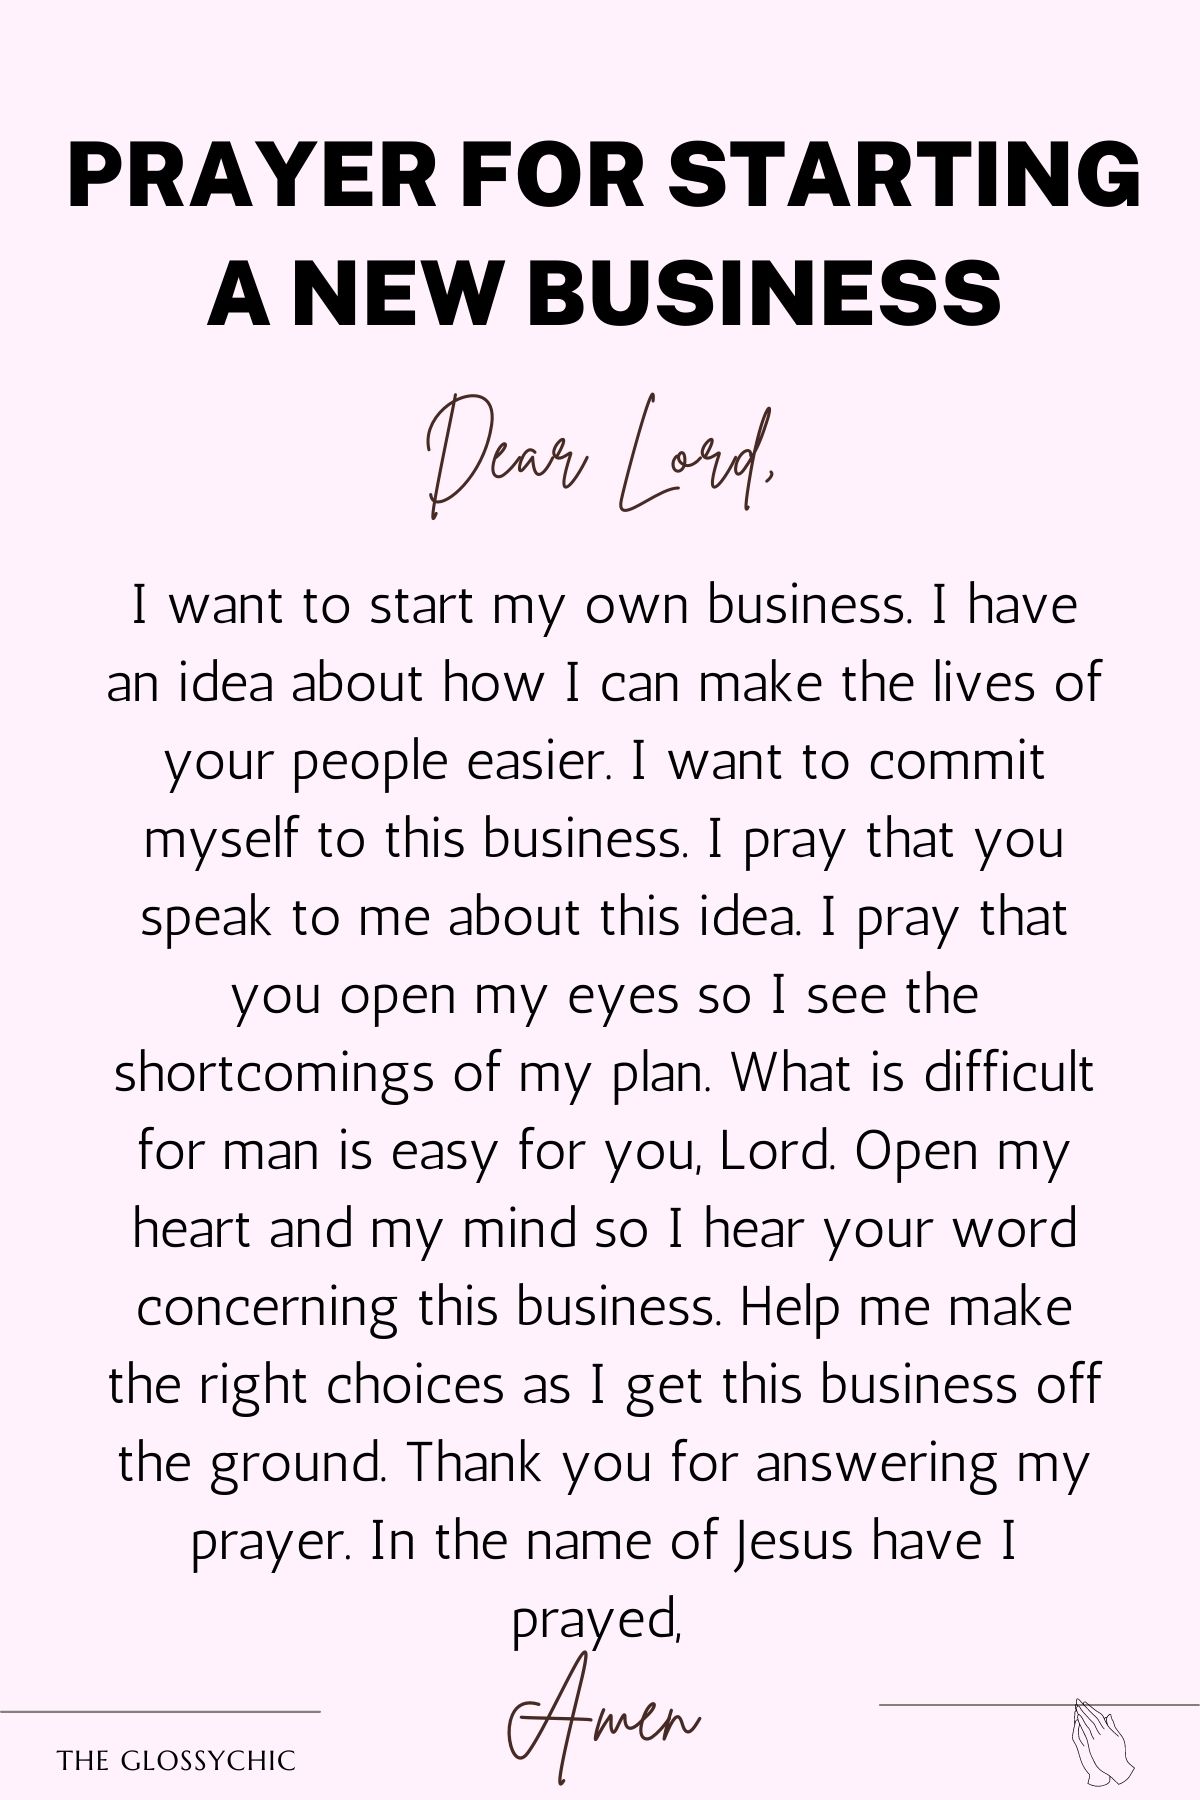 Prayer for starting a new business